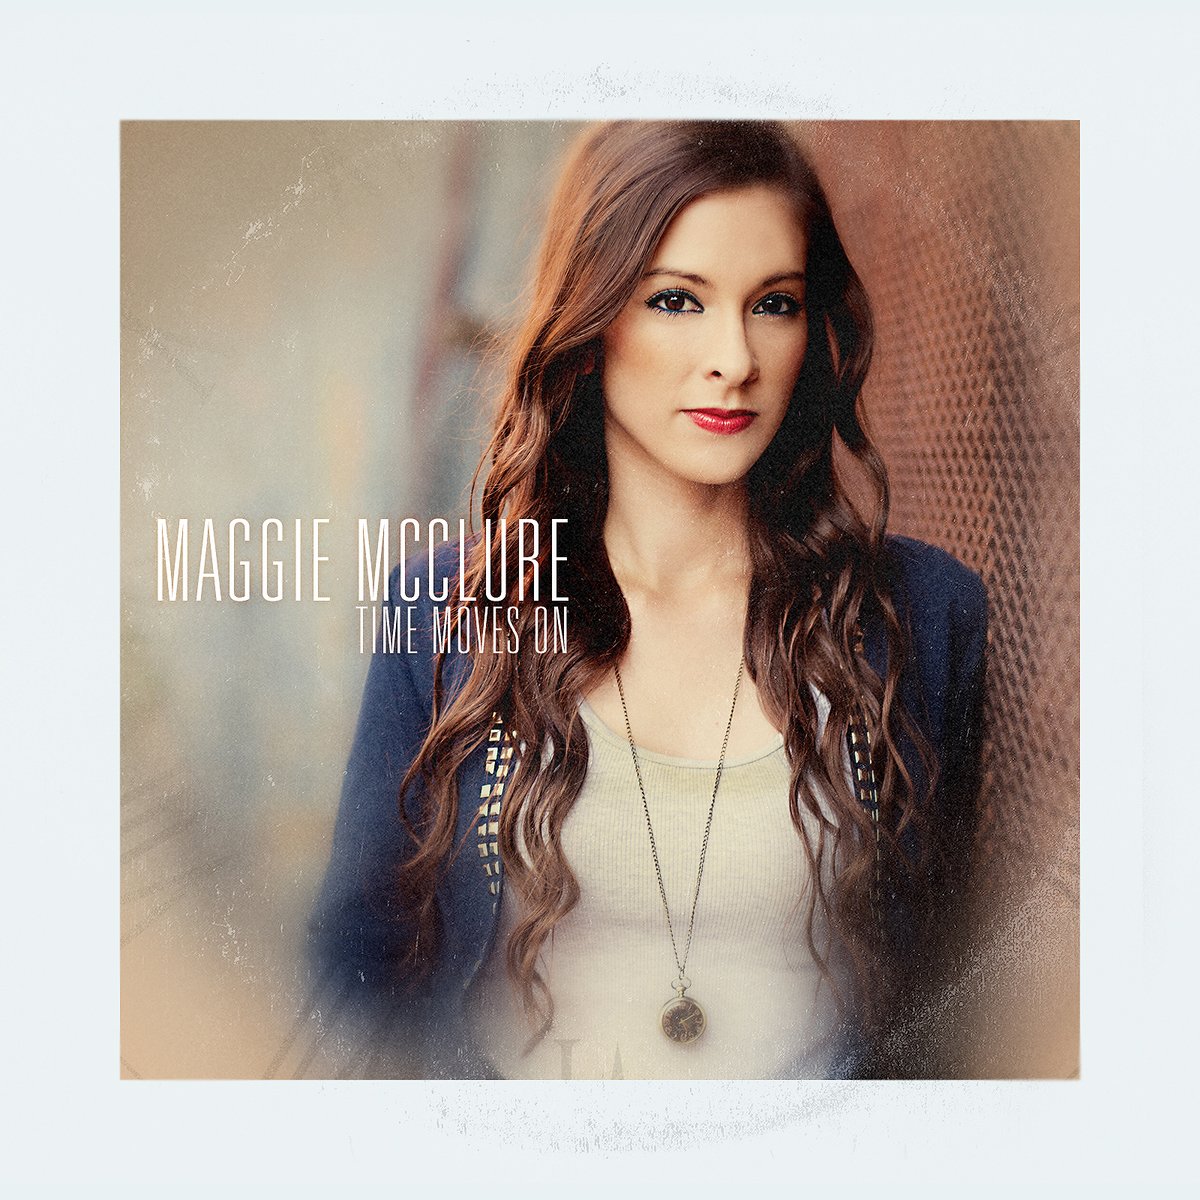 Image of "Time Moves On" CD by Maggie McClure